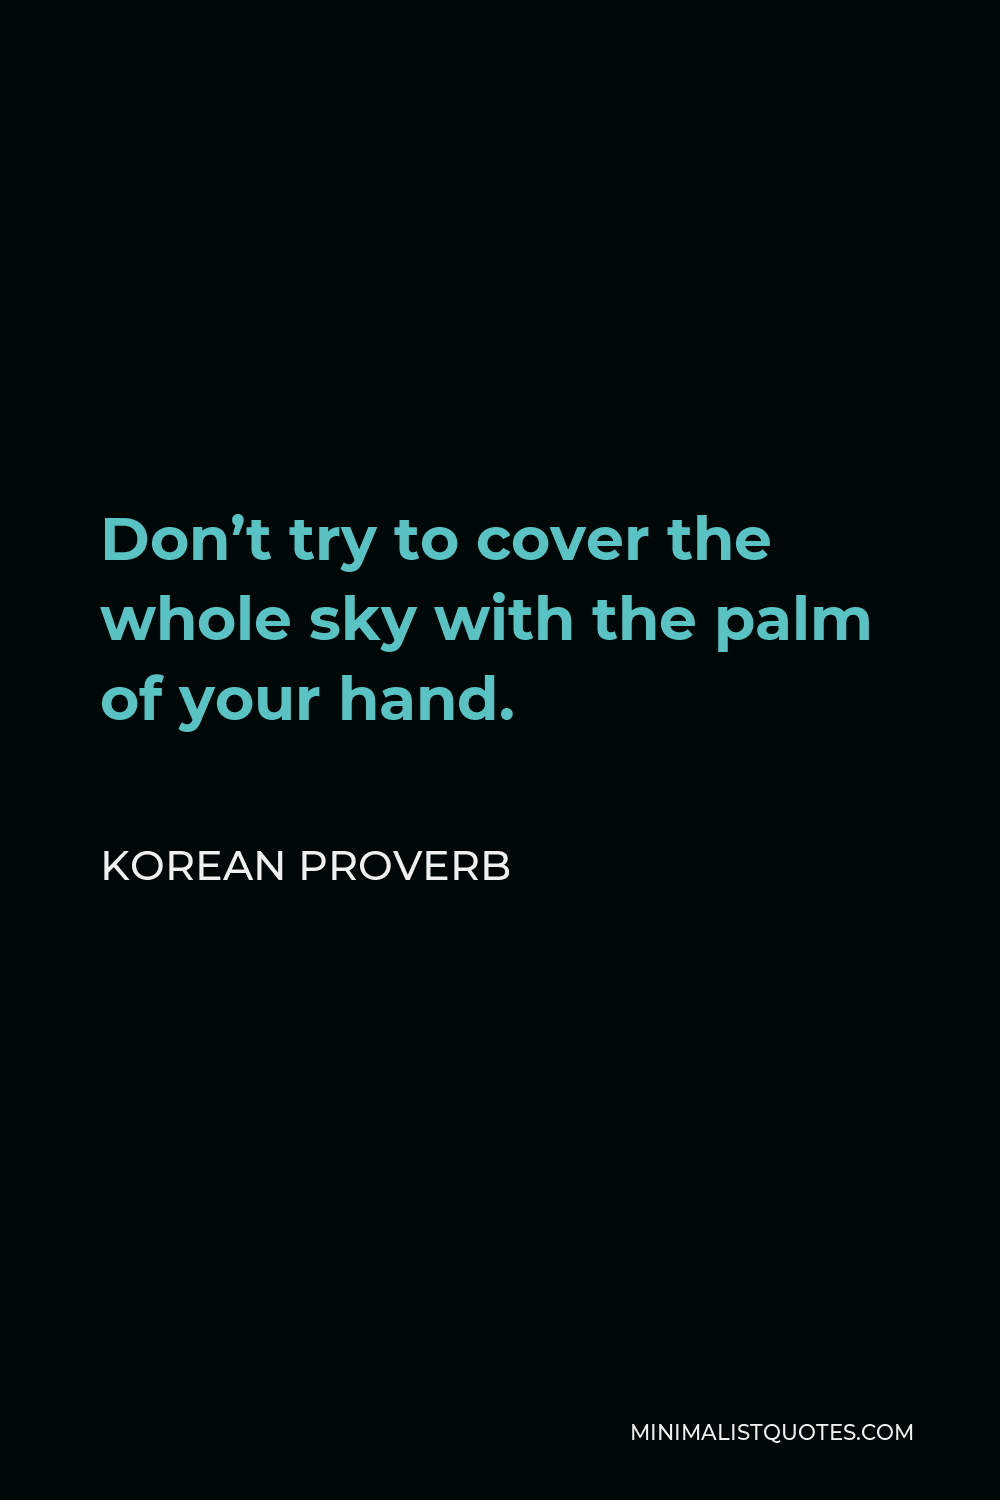 Korean Proverb Quote - Don’t try to cover the whole sky with the palm of your hand.